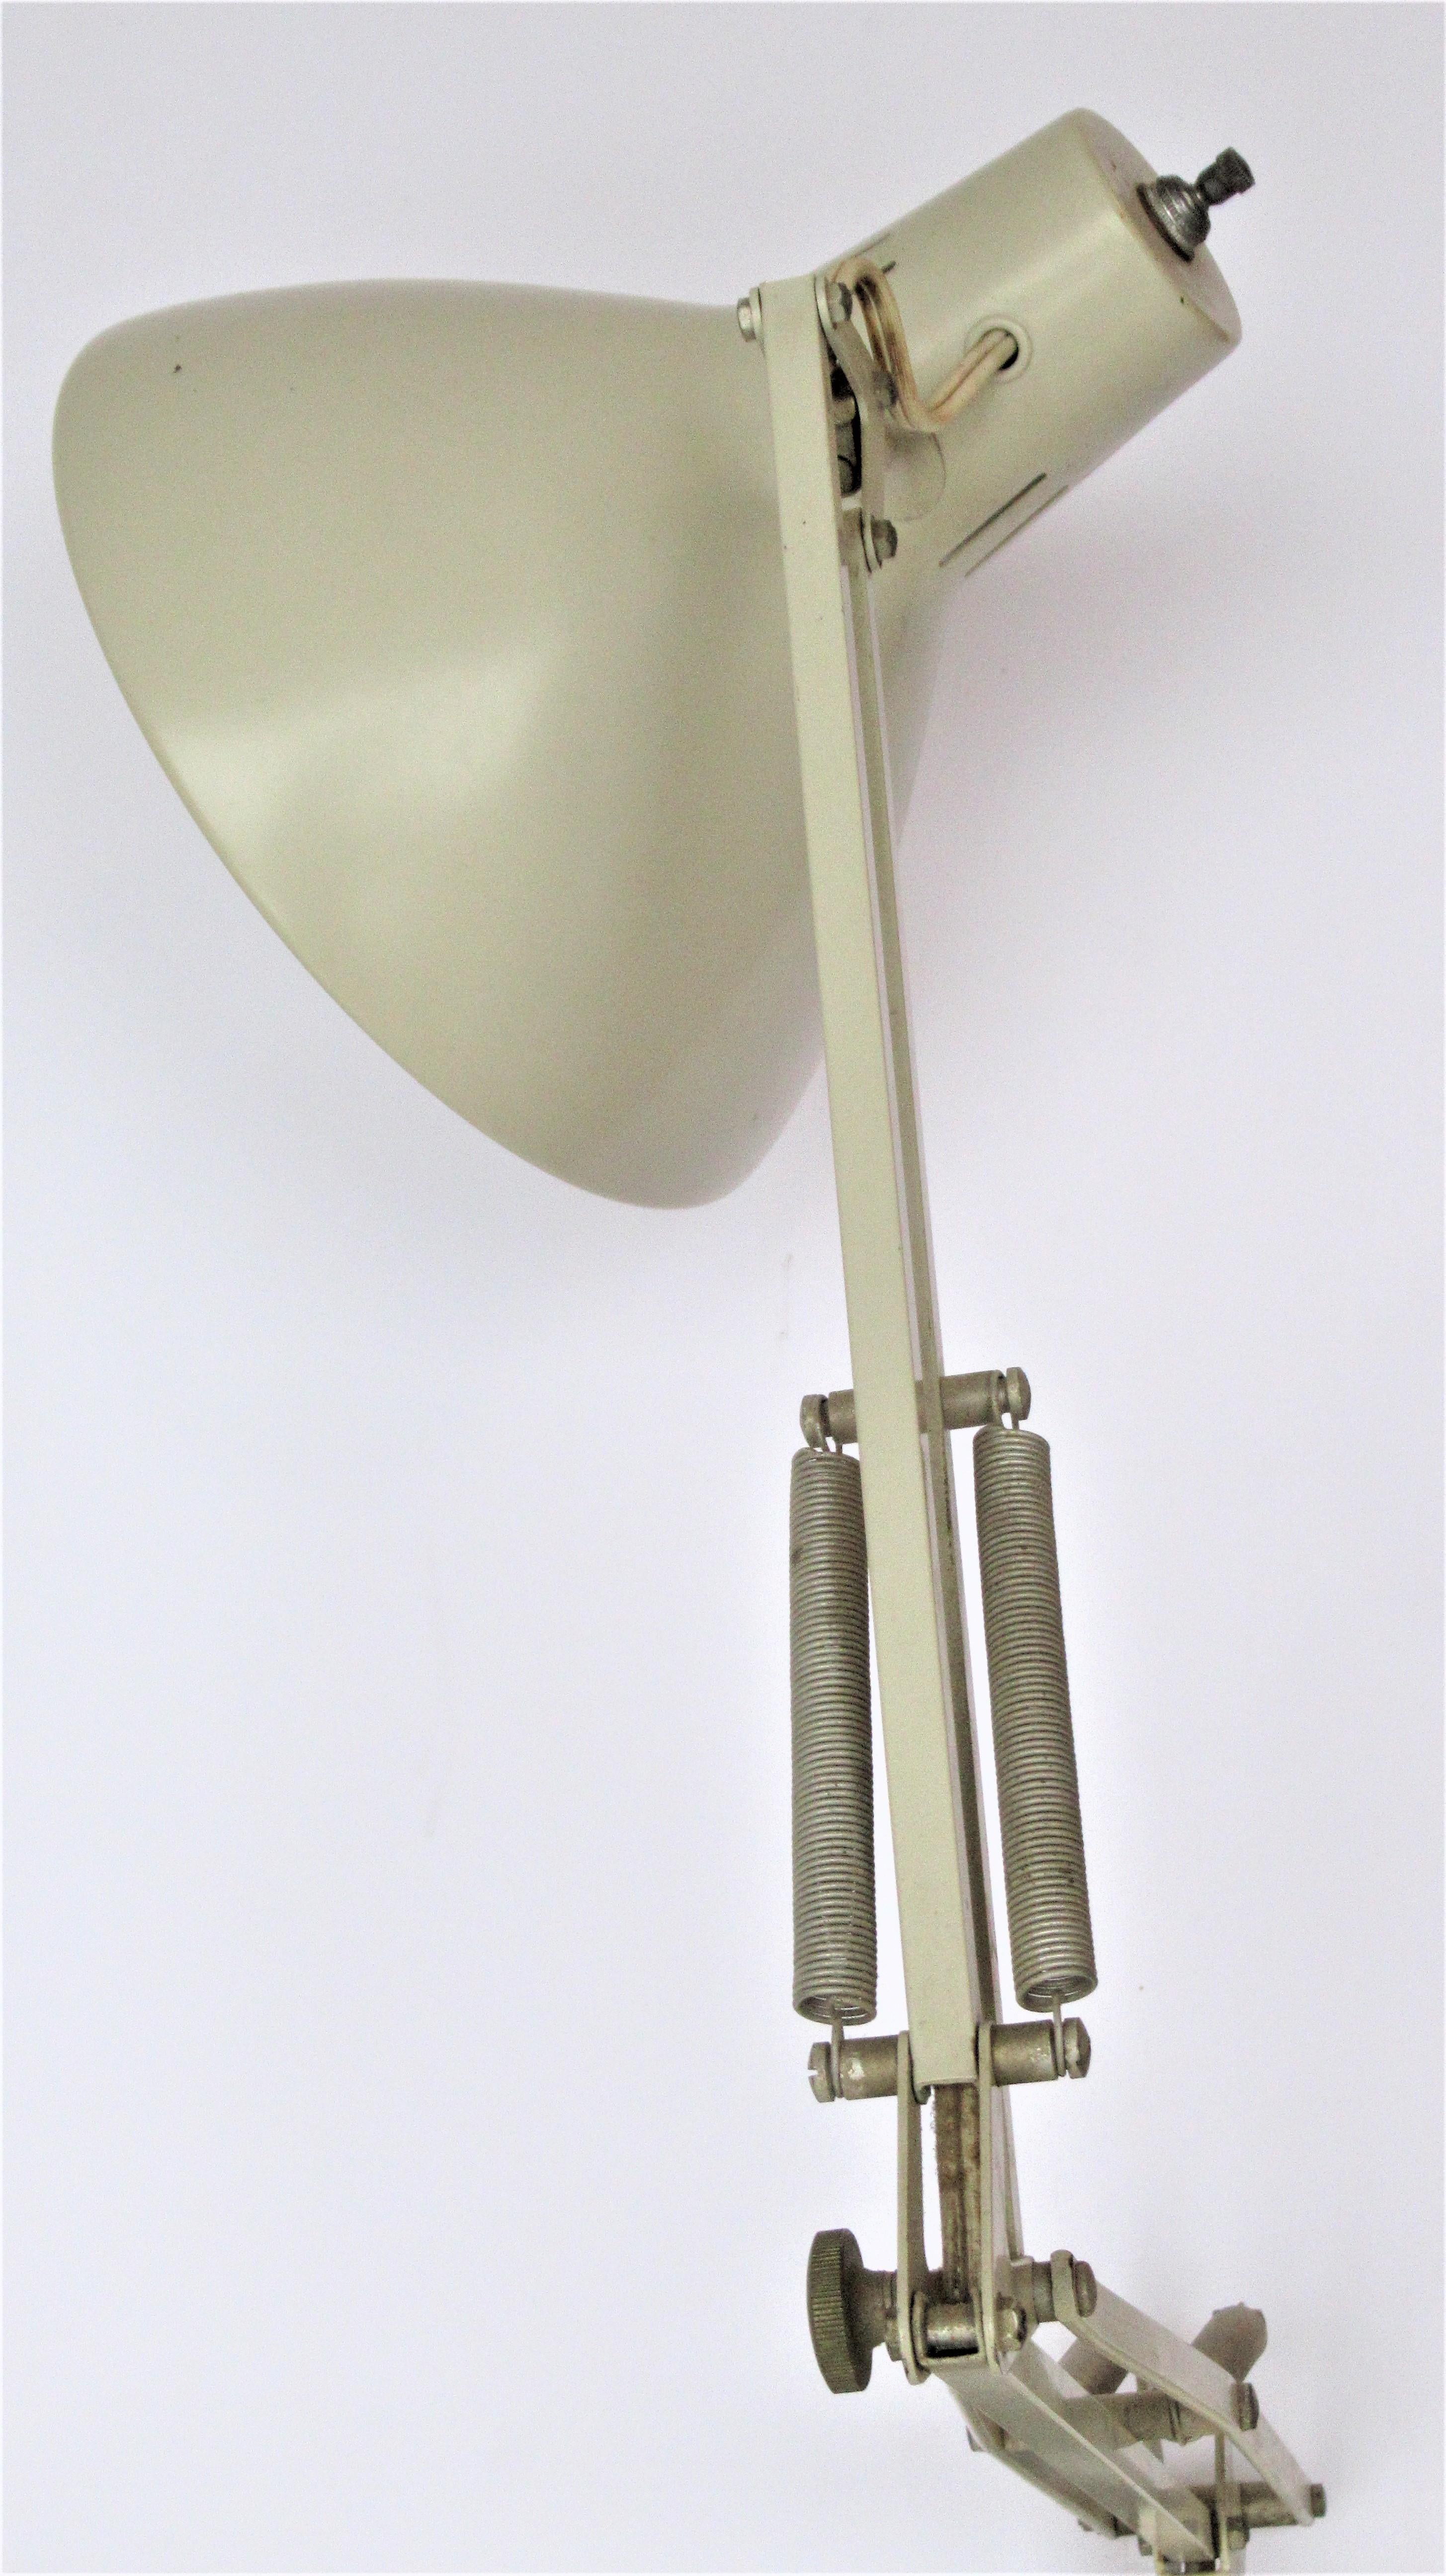 Lacquered Architectural Drafting Lamp by Luxo, Norway